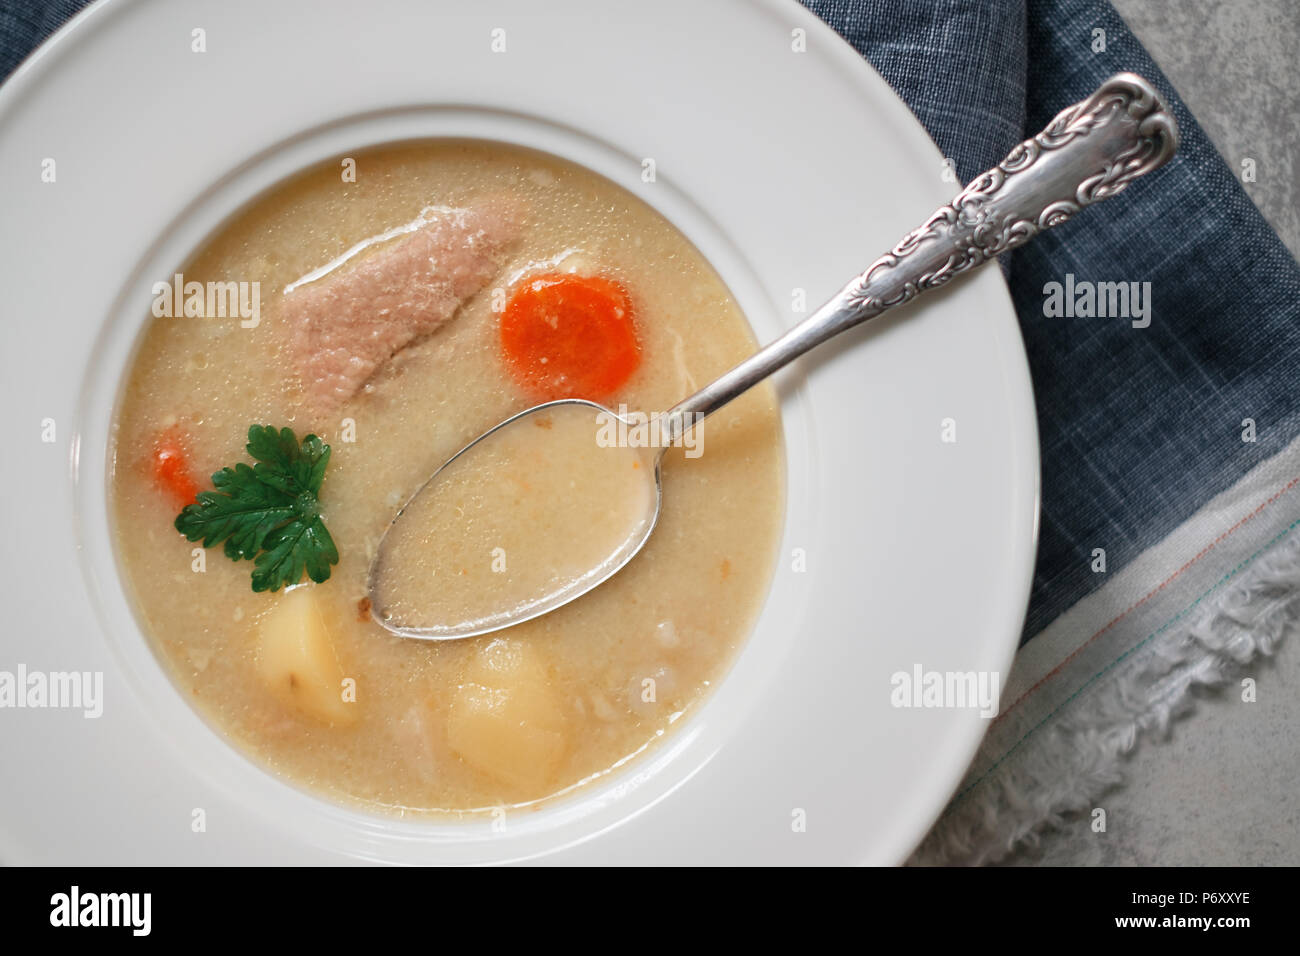 Soup with potato and pork meat Stock Photo